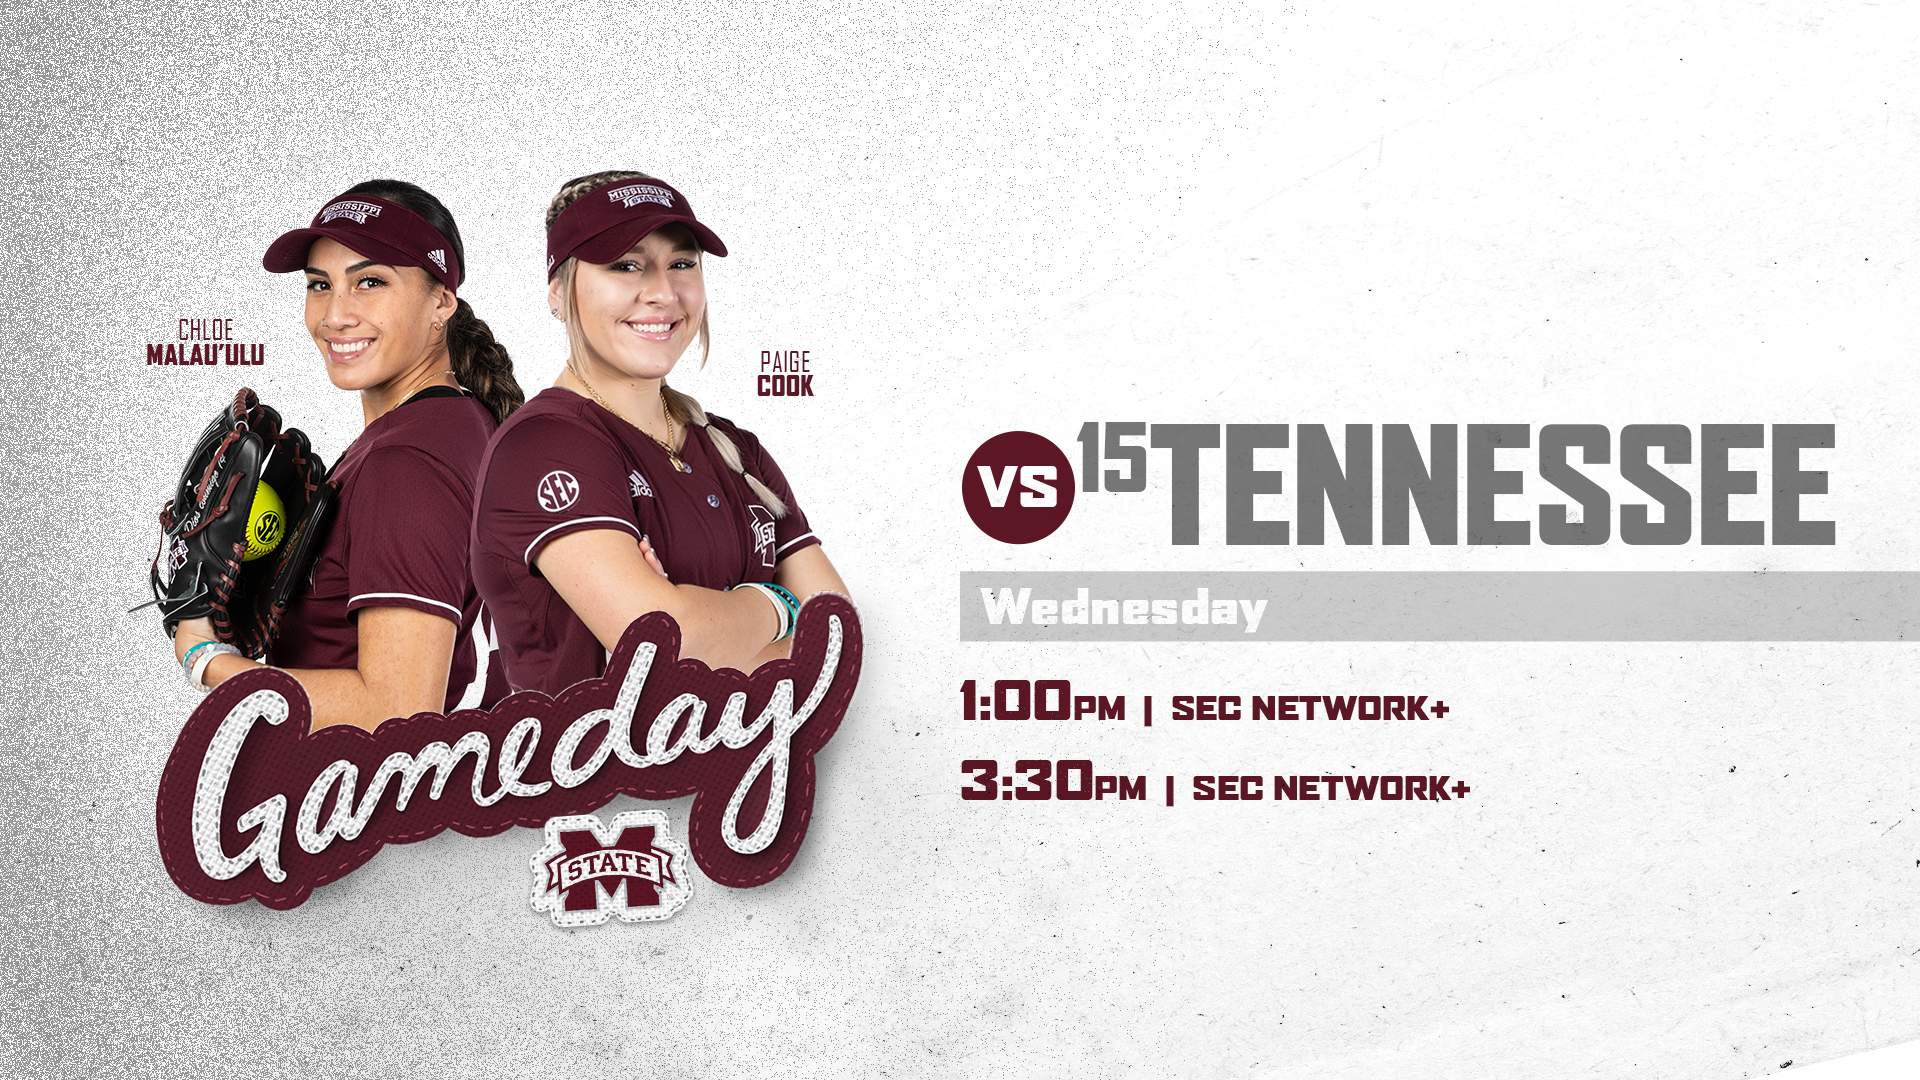 Maroon, white and gray gameday graphic with images of MSU softball players Chloe Malau'ulu and Paige Cook